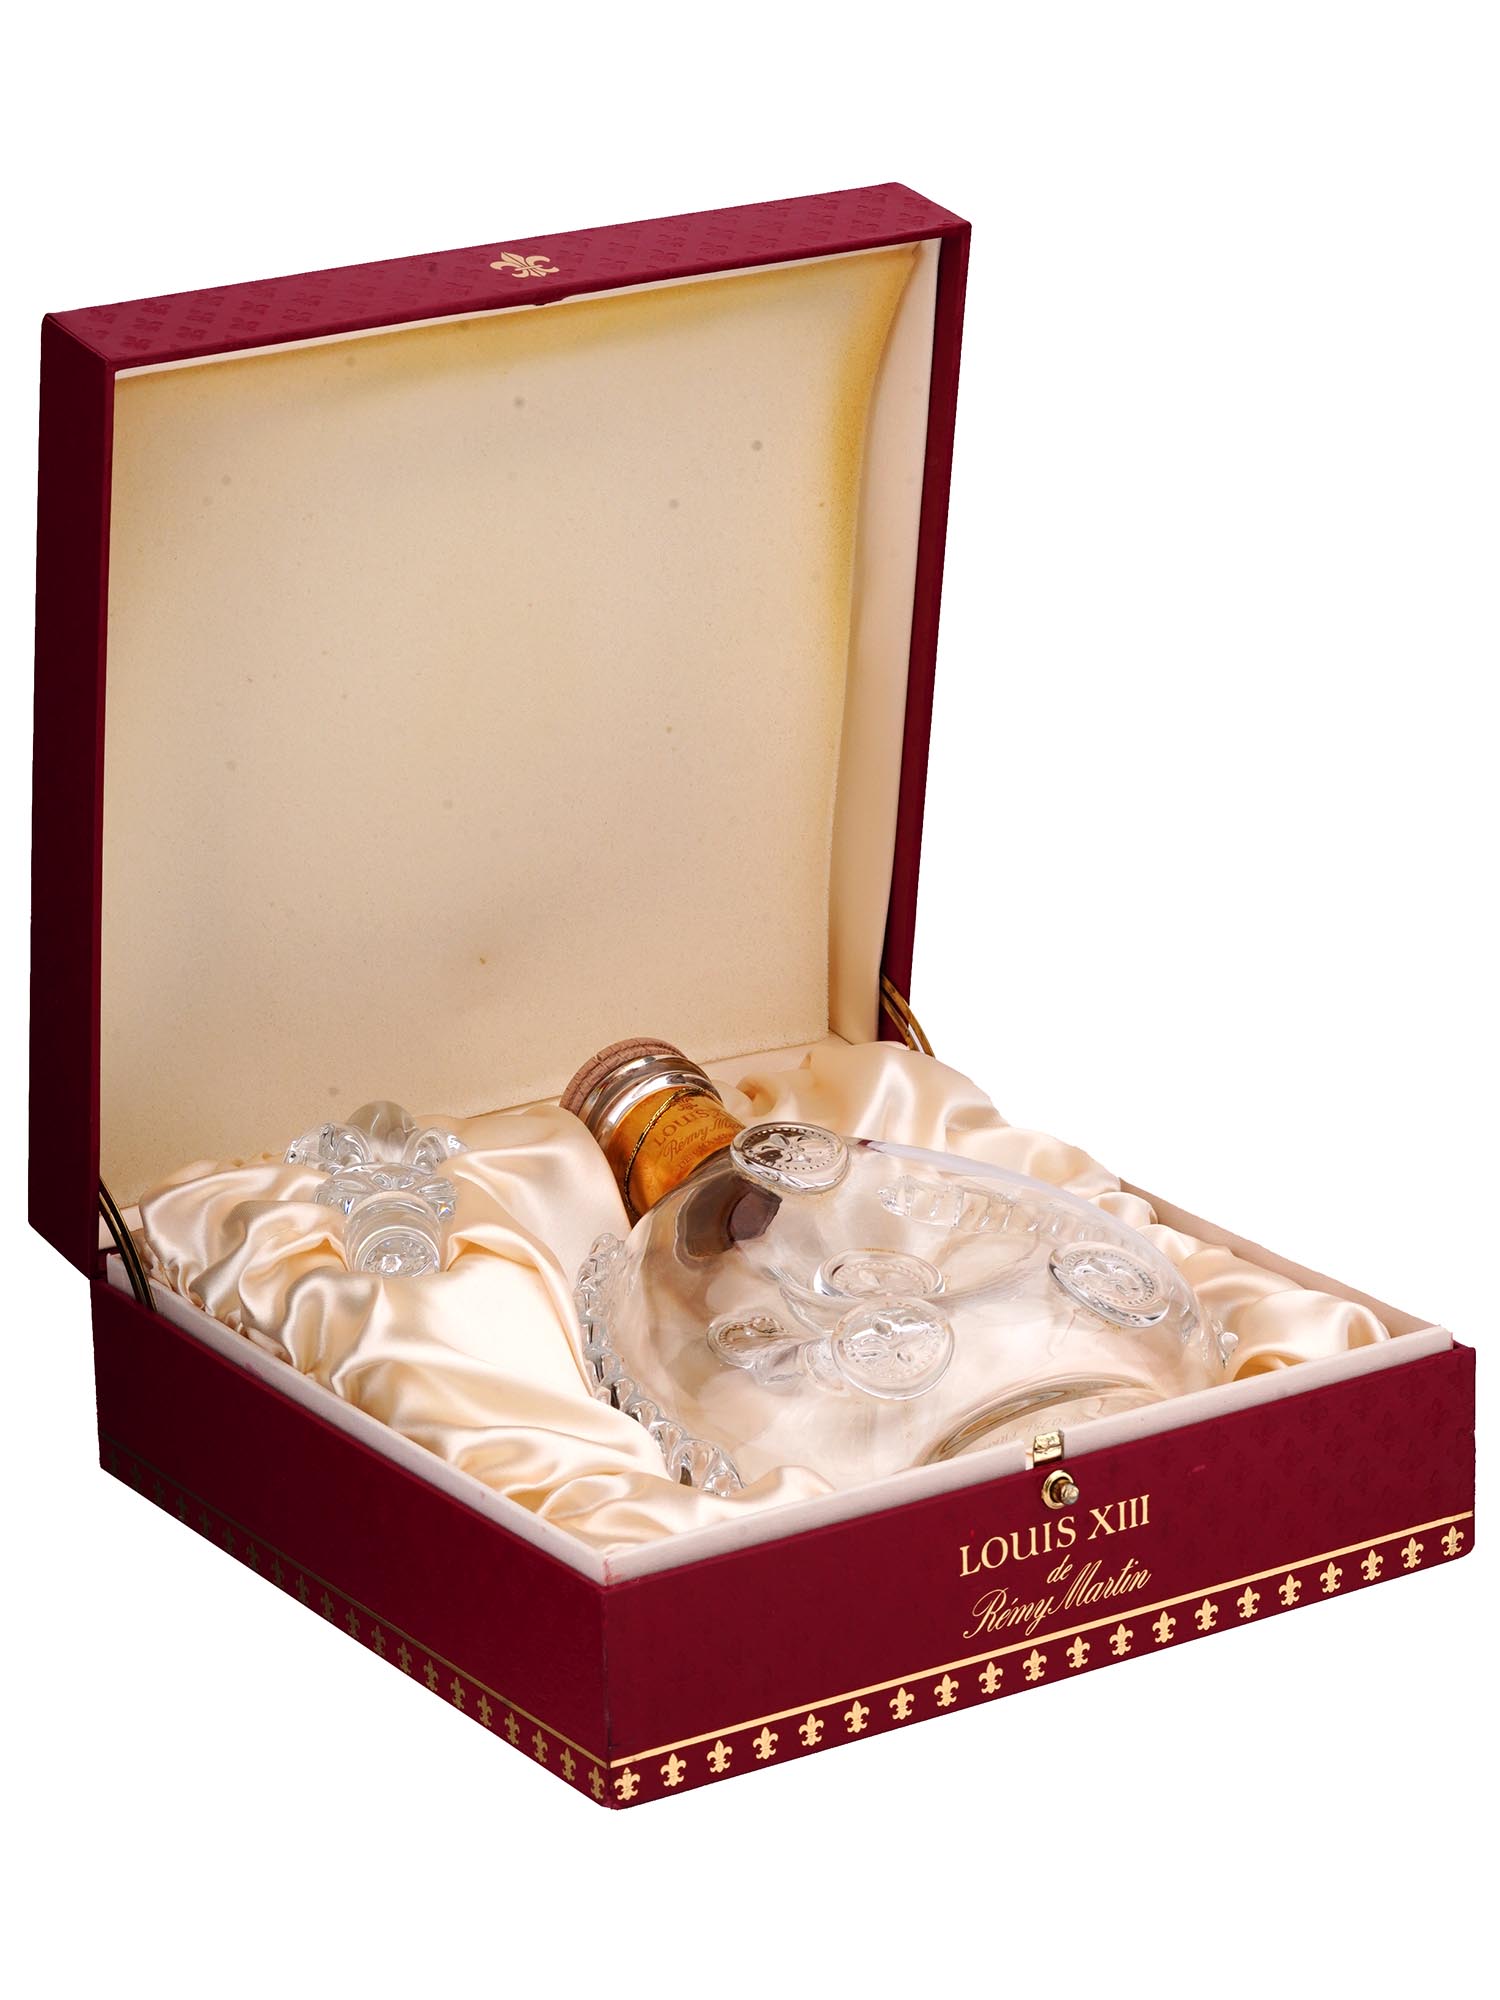 LOUIS XIII REMY MARTIN COGNAC BOTTLE AND RED BOX PIC-1